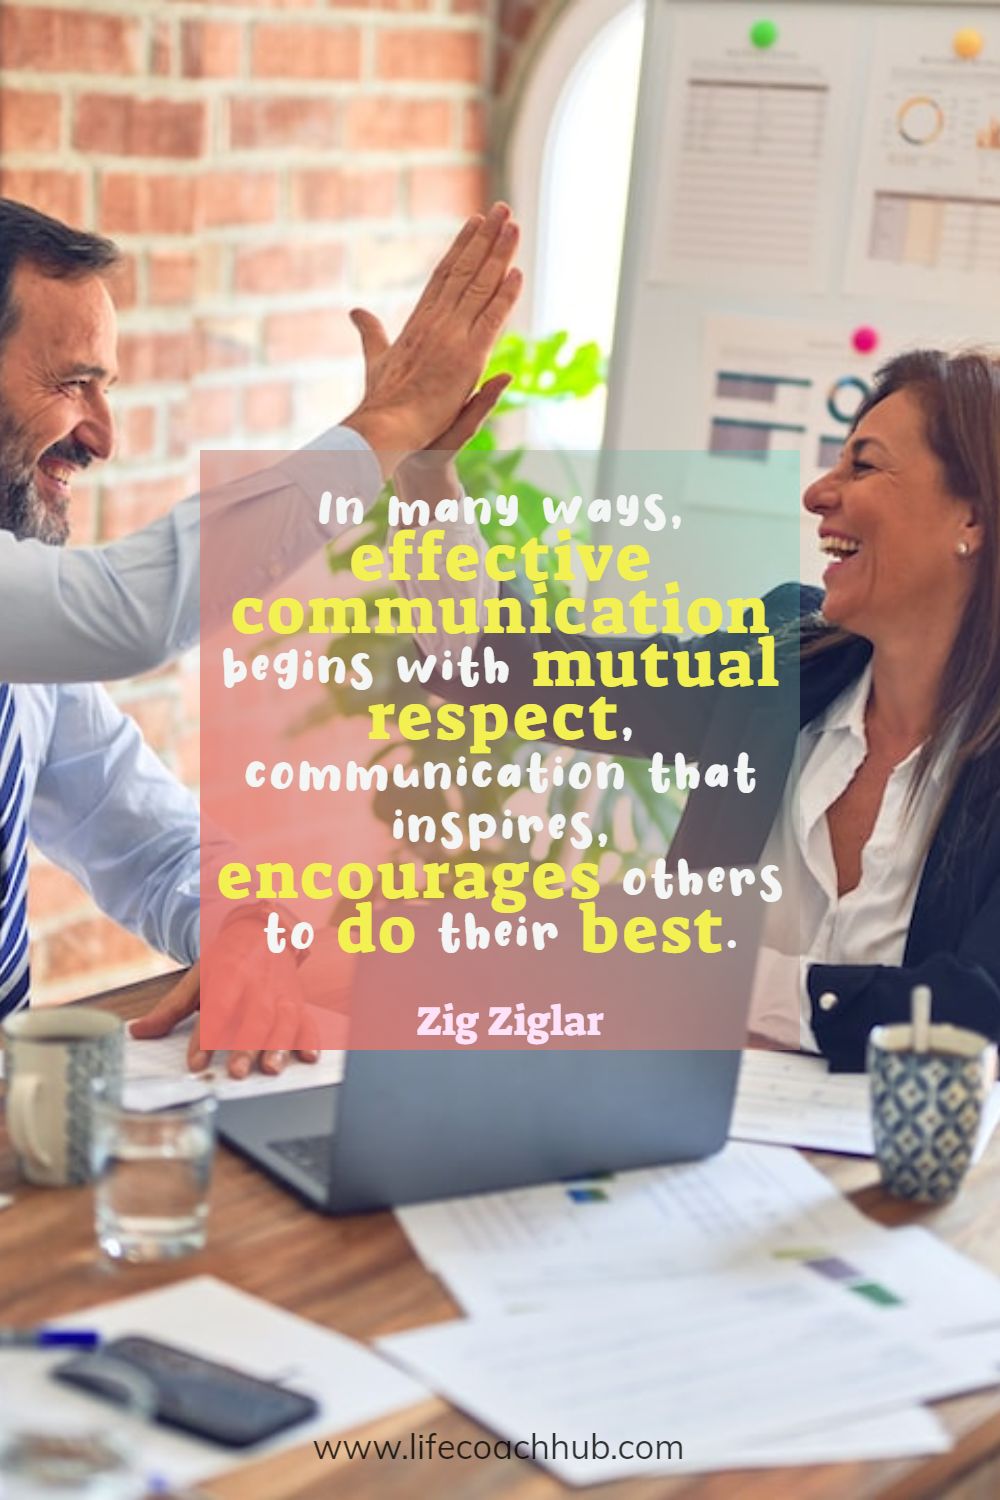 In many ways, effective communication begins with mutual respect, communication that inspires, encourages others to do their best.  Zig Ziglar Coaching Quote